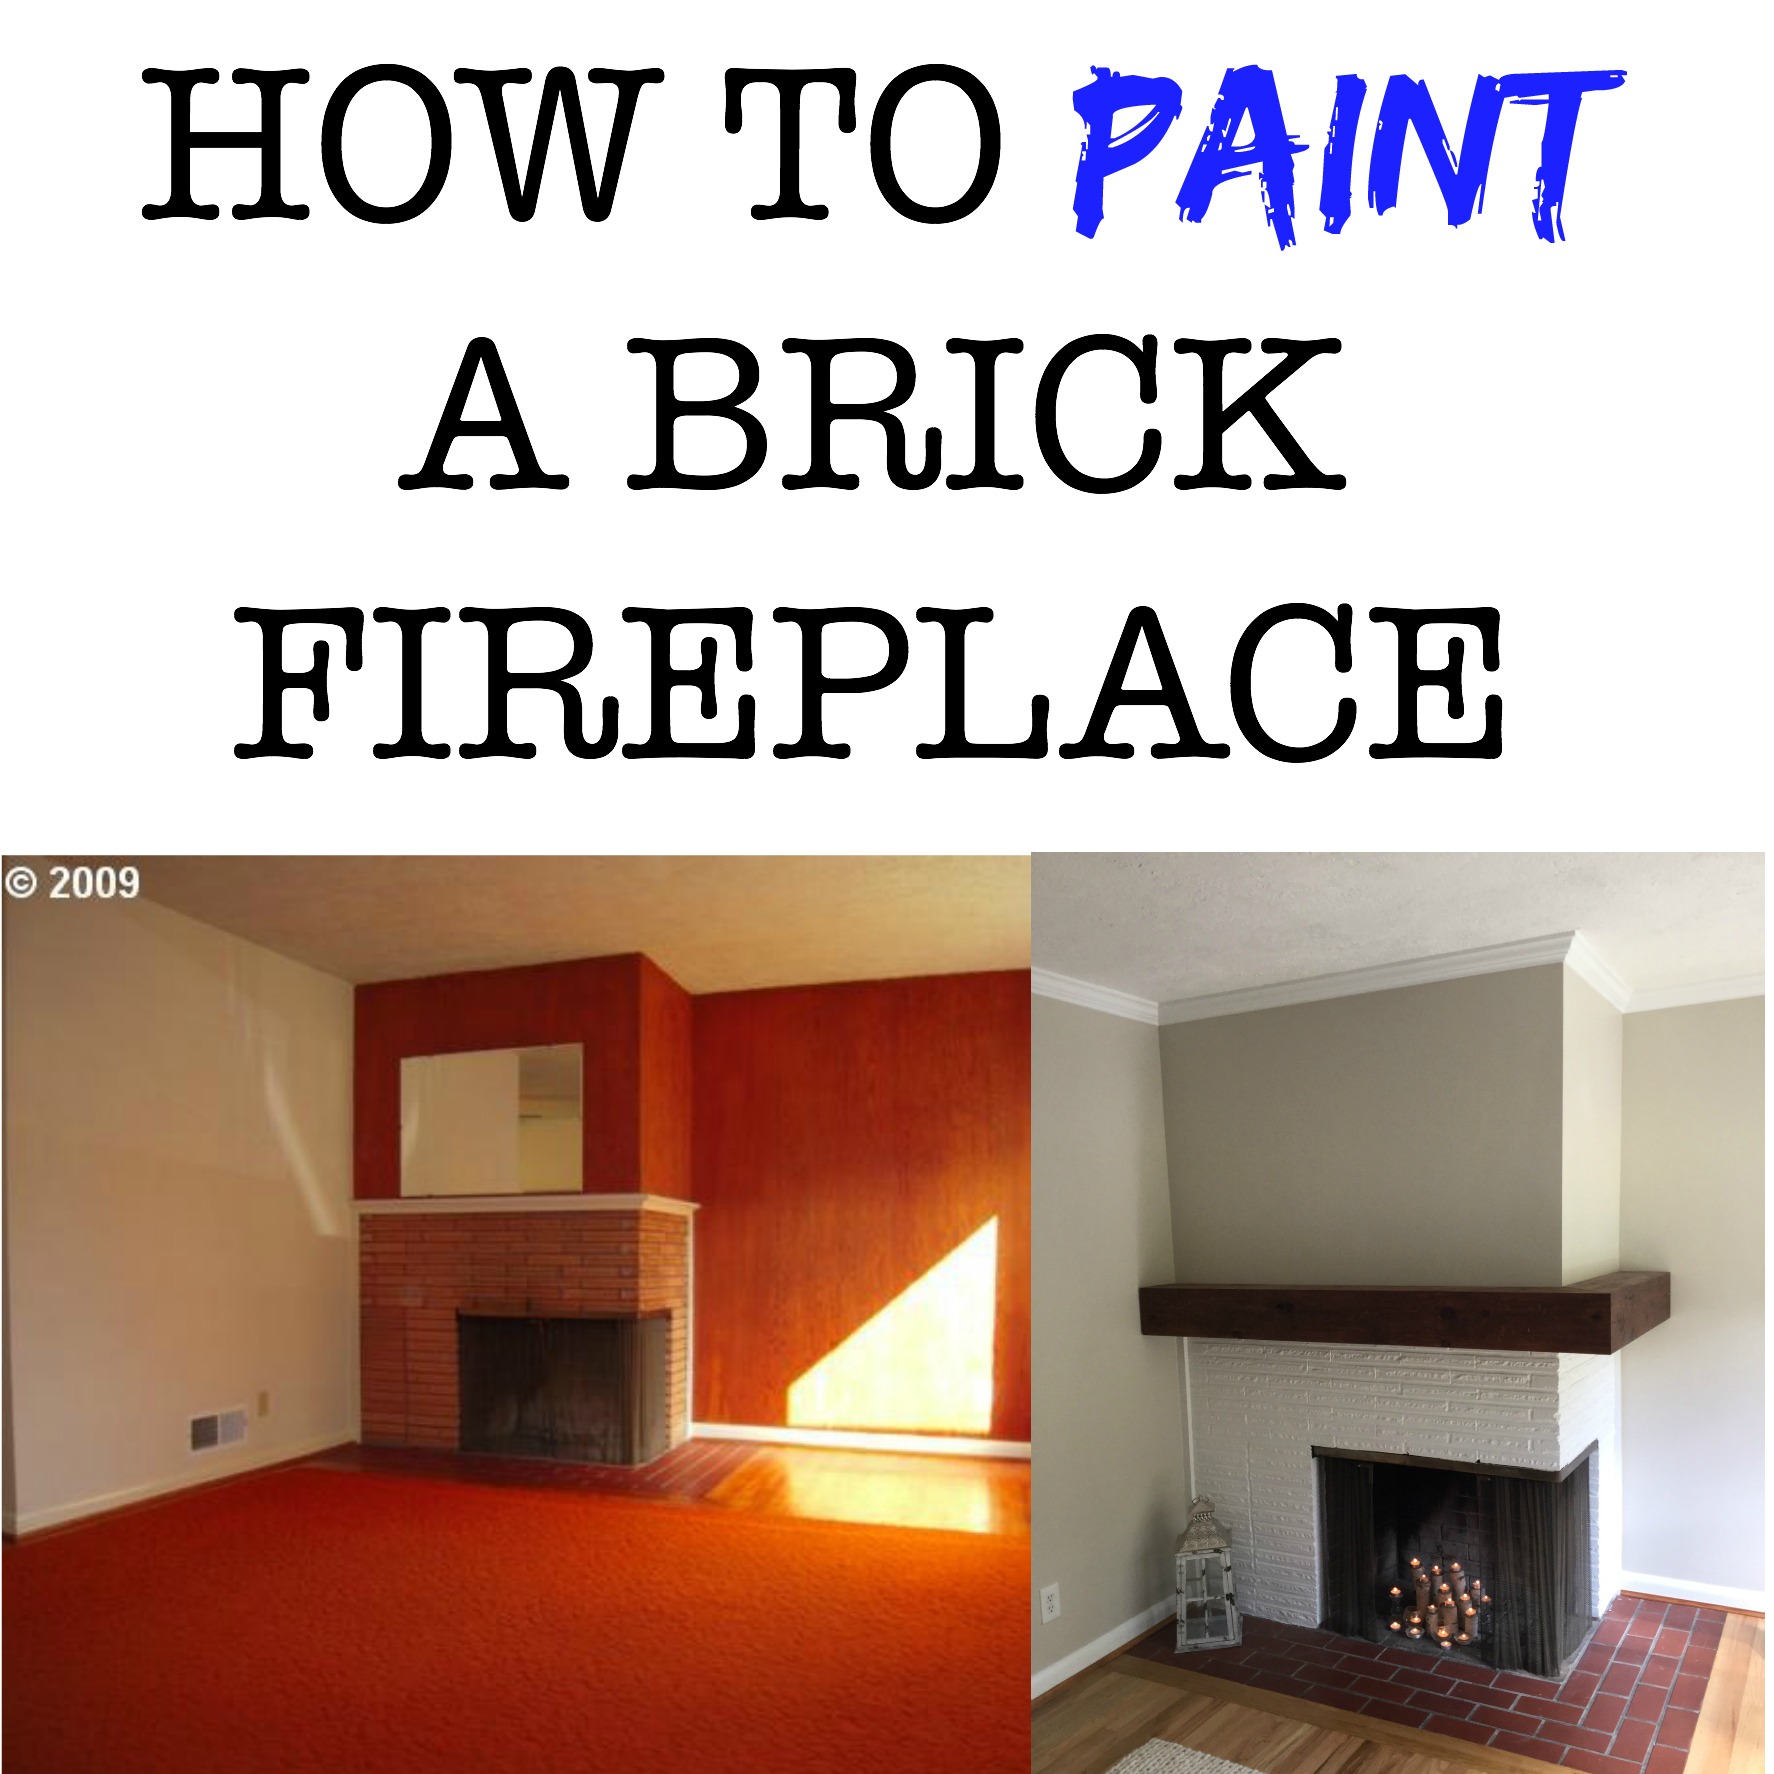 How to paint a brick fireplace